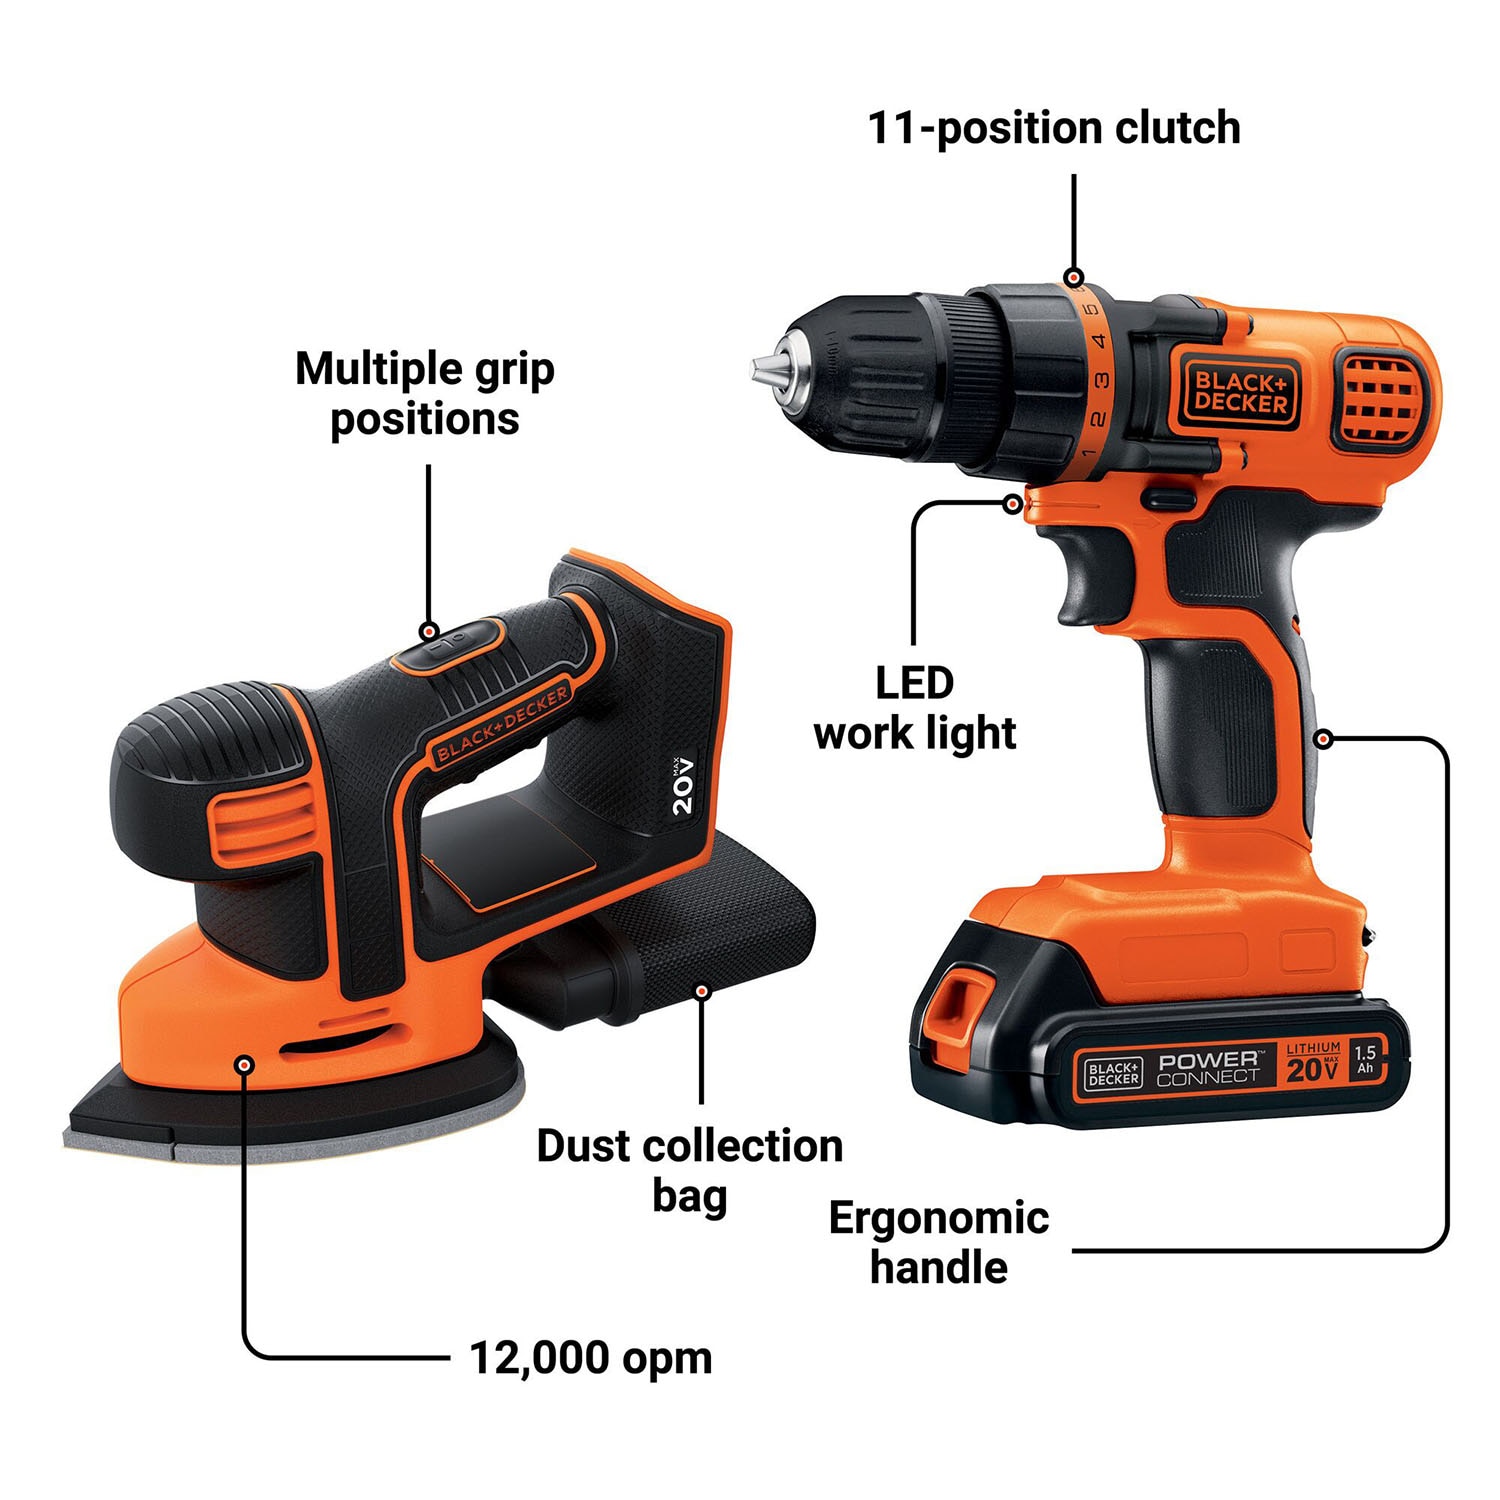 Black & Decker Adds Bluetooth to Their 20V Battery, but Do We Need It?